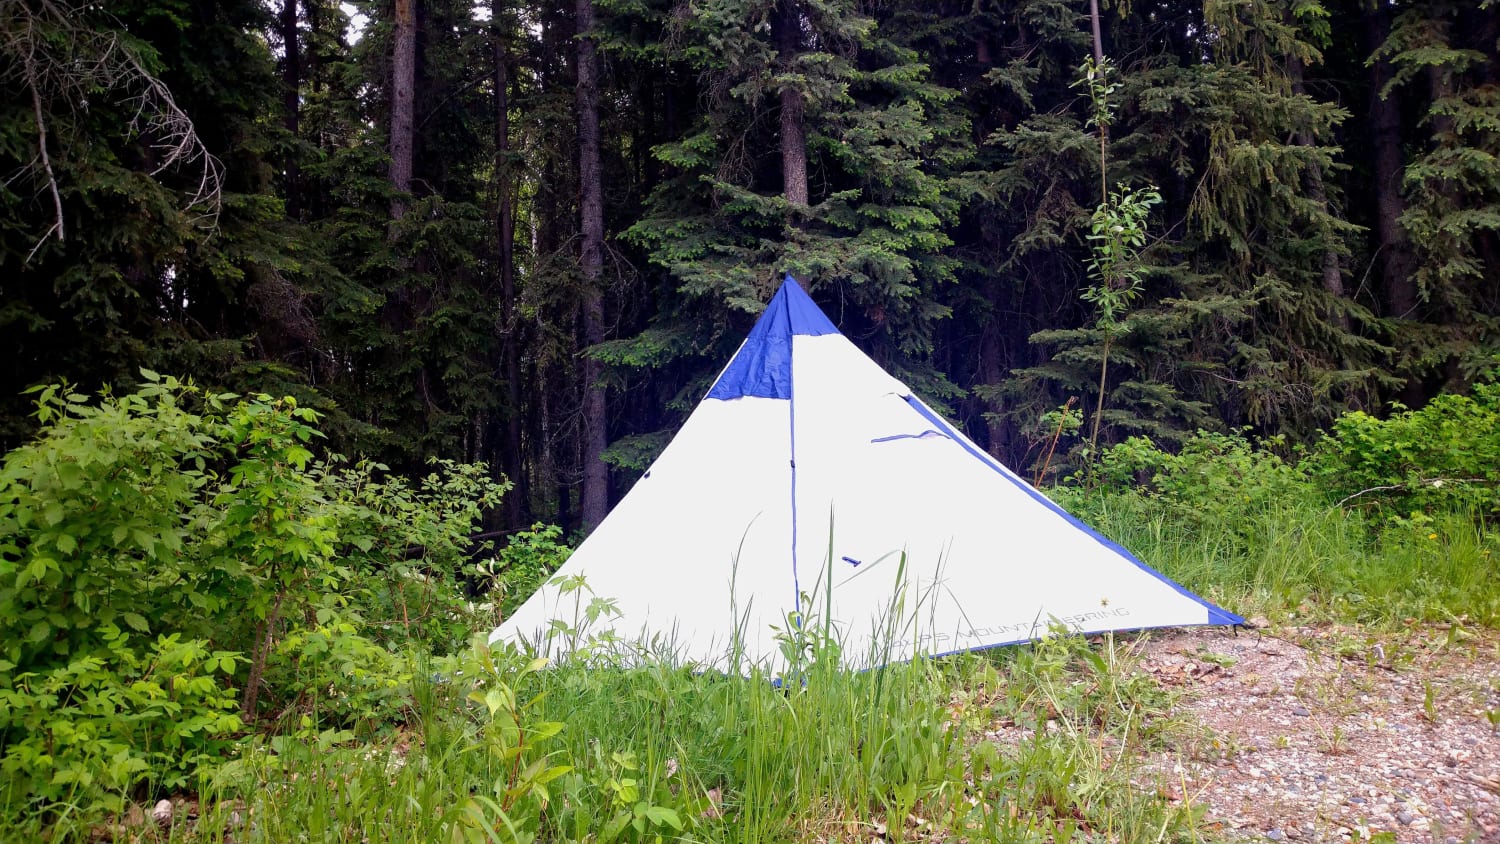 Alps Mountaineering Trail Tipi success. Review below.